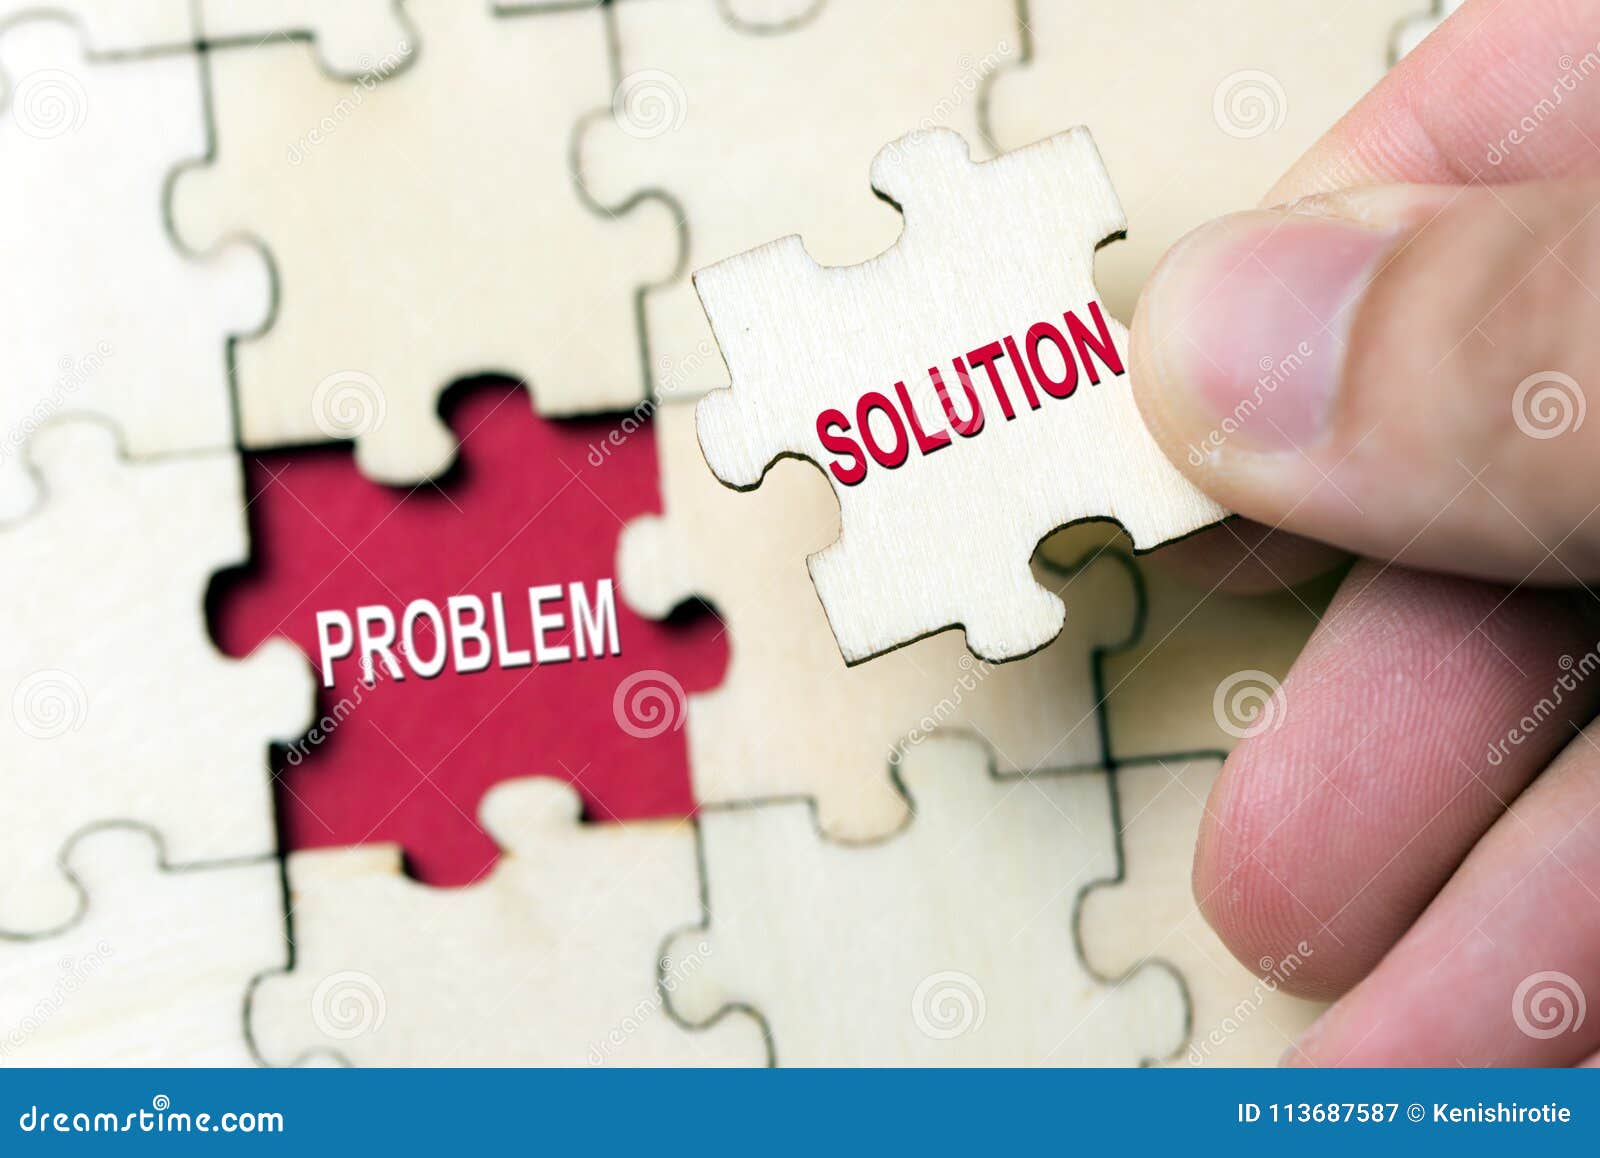 solution to problem concept